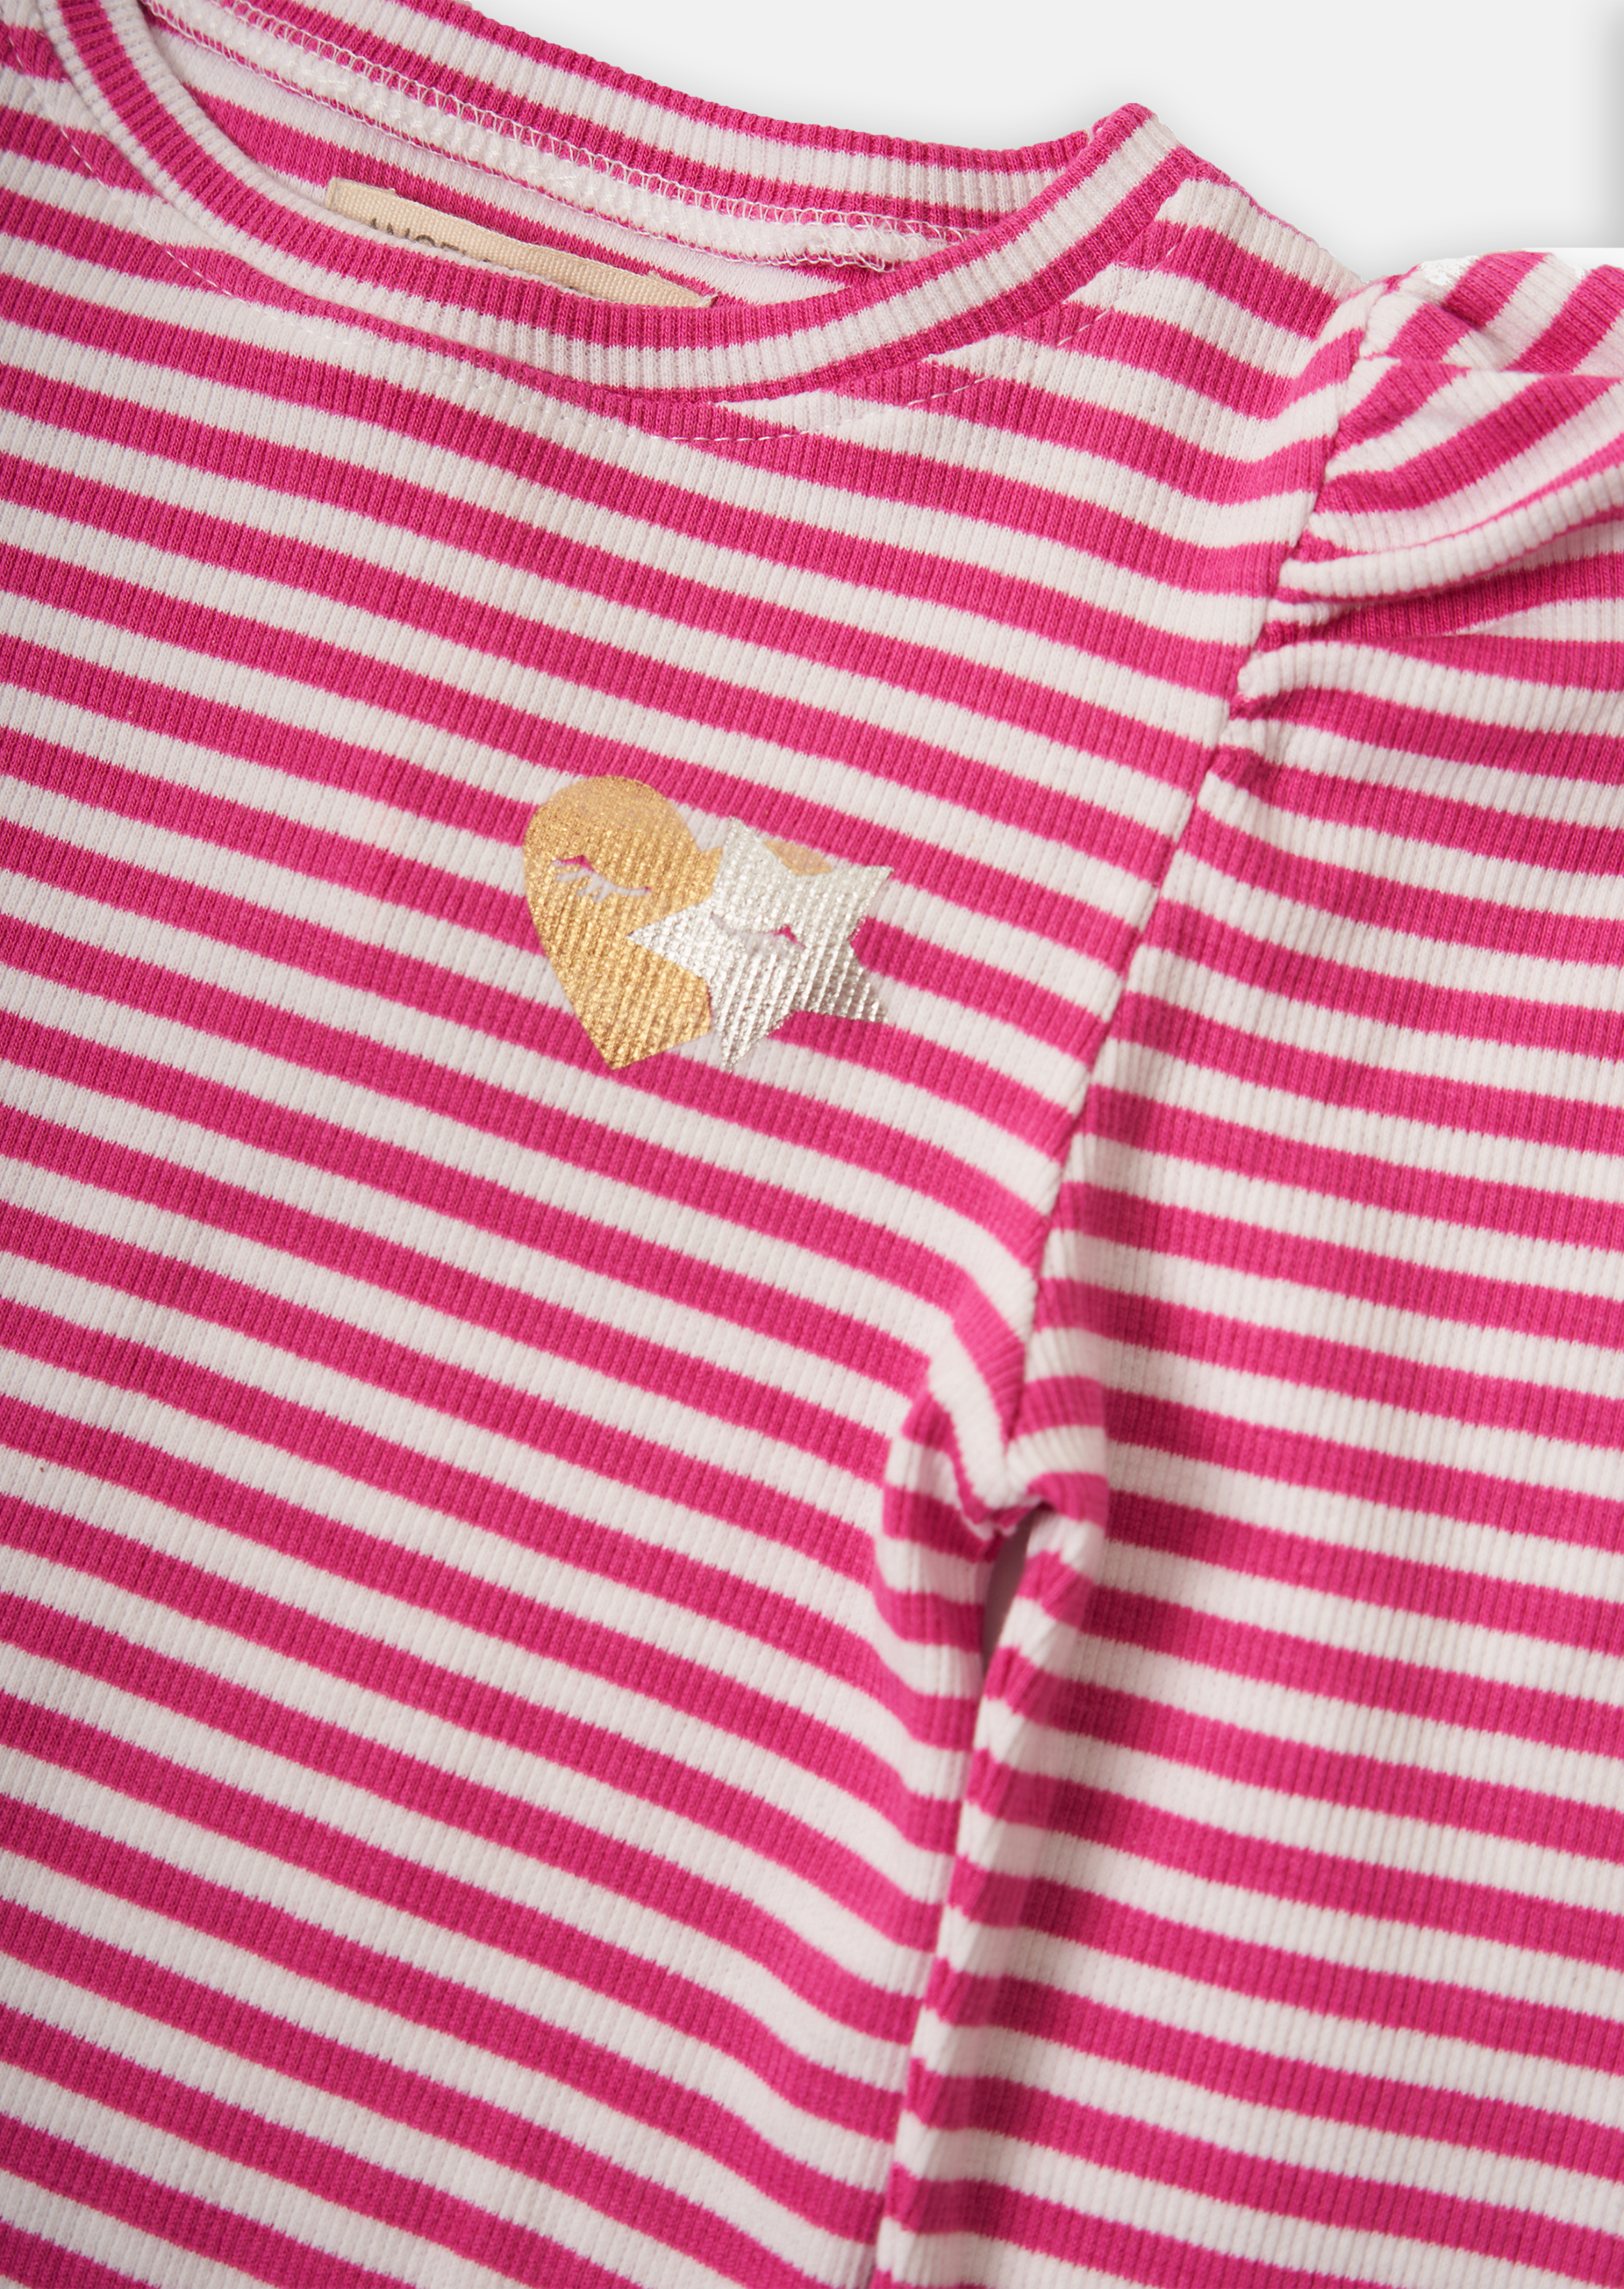 Girls Striped Full Sleeves Cotton Pink Top